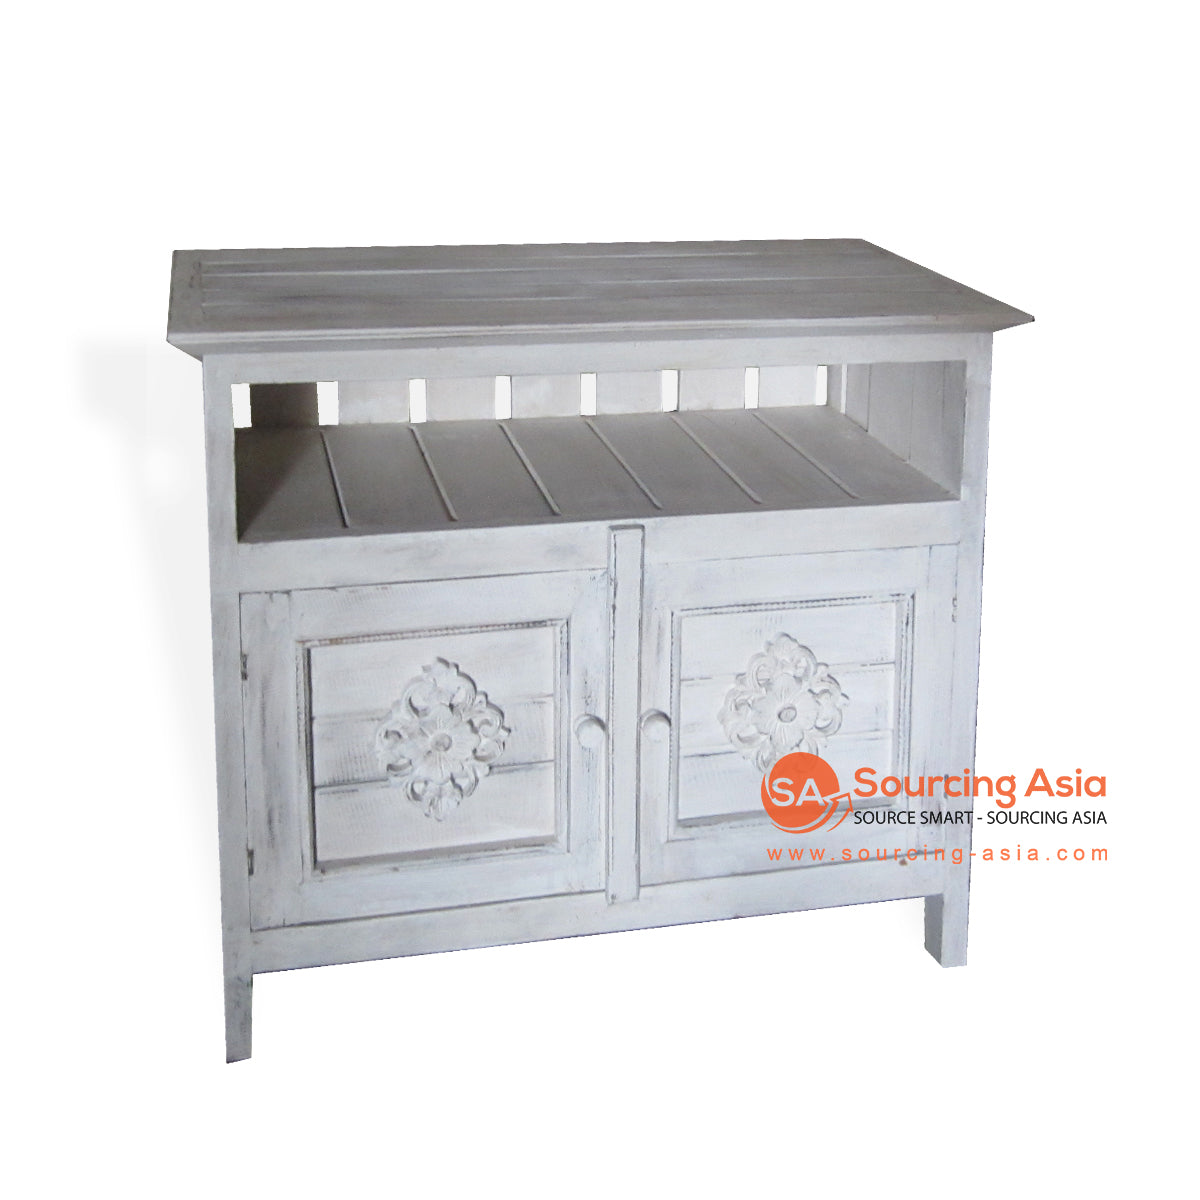 THE028 WHITE WASH WOODEN TV TABLE WITH A SHELF AND TWO CABINETS